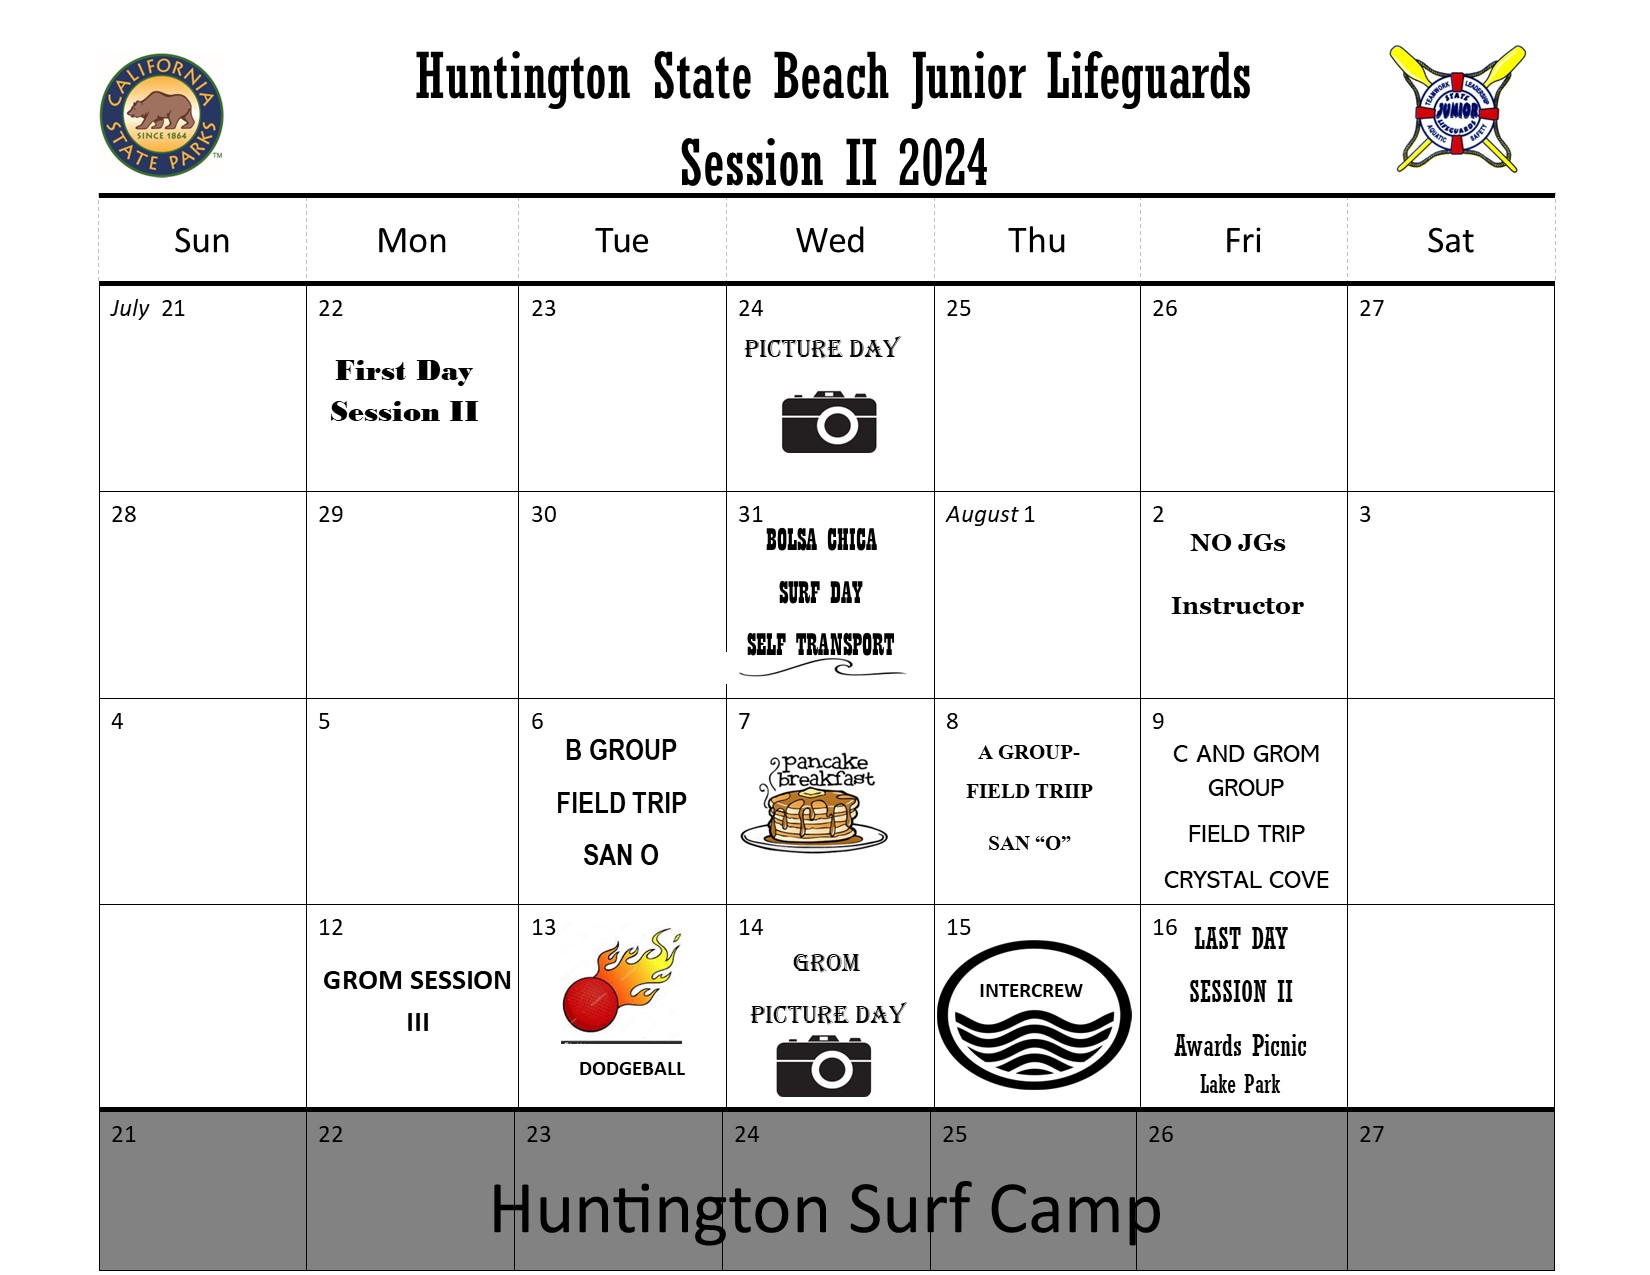 Huntington State Beach Junior Lifeguards Session I 2024 Calendar. The California state parks logo and California State Junior Lifeguard program logos on the top. July 22 First Day Session II. July 24 Picture Day. July 31 Bolsa Chica Surf Day Self Transport. August 2 NO JGs Instructor. August 6 B Group Field Trip San O. August 7 Pancake Breakfast. August 8 A Group Field Trip San O. August 9 C and Grom Group Field Trip Crystal Cove. August 12 Grom Session III. August 13 Dodgeball. August 14 Grom Picture Day. August 15 Intercrew. August 16 Last Day Session II Awards Picnic Lake Park. August 21-27 greyed out for Huntington Surf Camp.